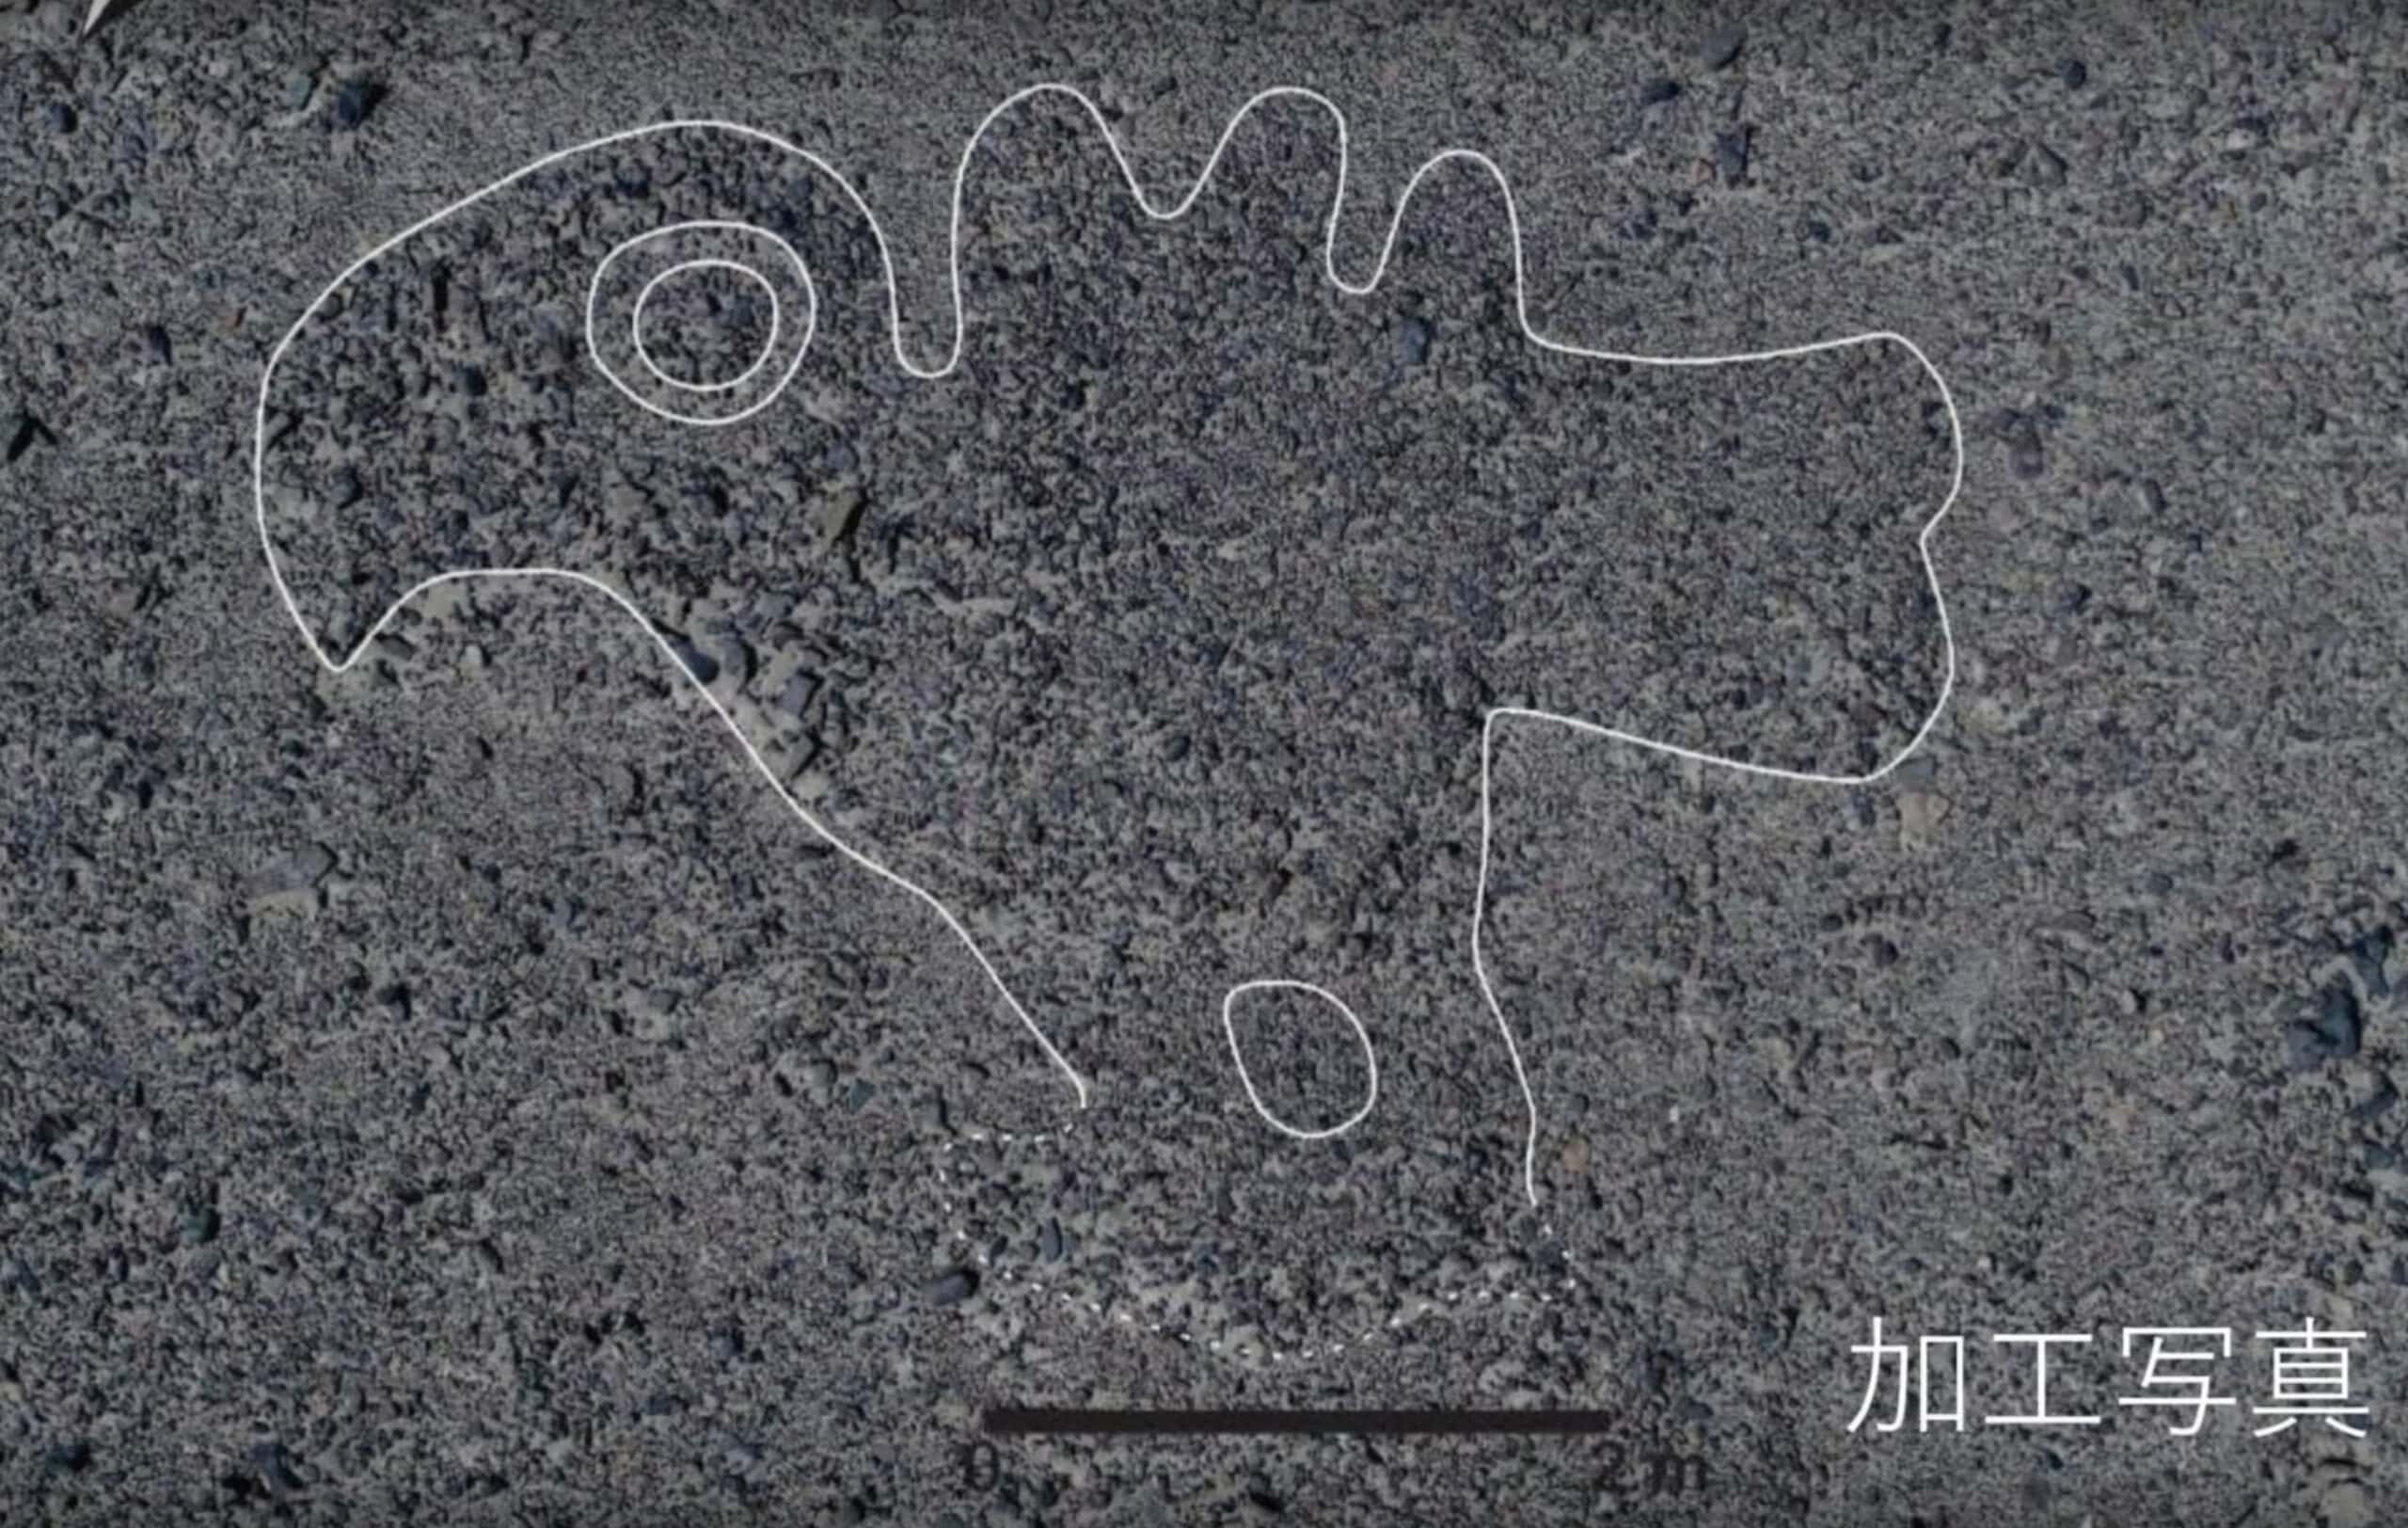 Screen-Shot----at-..-AM-scaled - Researchers reveal 143 new Nazca Lines of strange humanoid beings and a two-headed ‘snake’